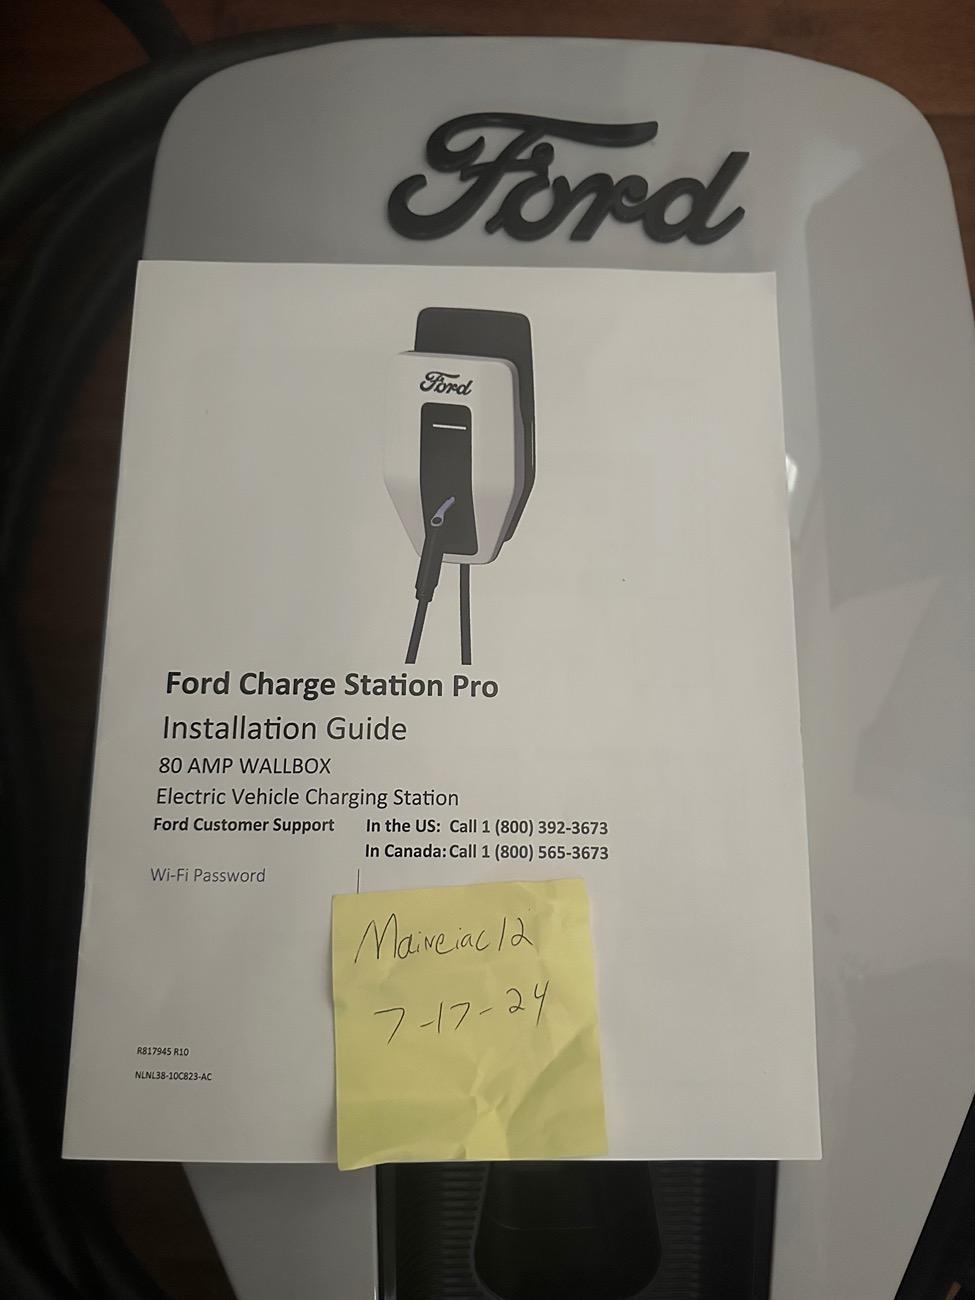 Ford F-150 Lightning For sale: Charge Station Pro ($350 - used, like new) IMG_4665